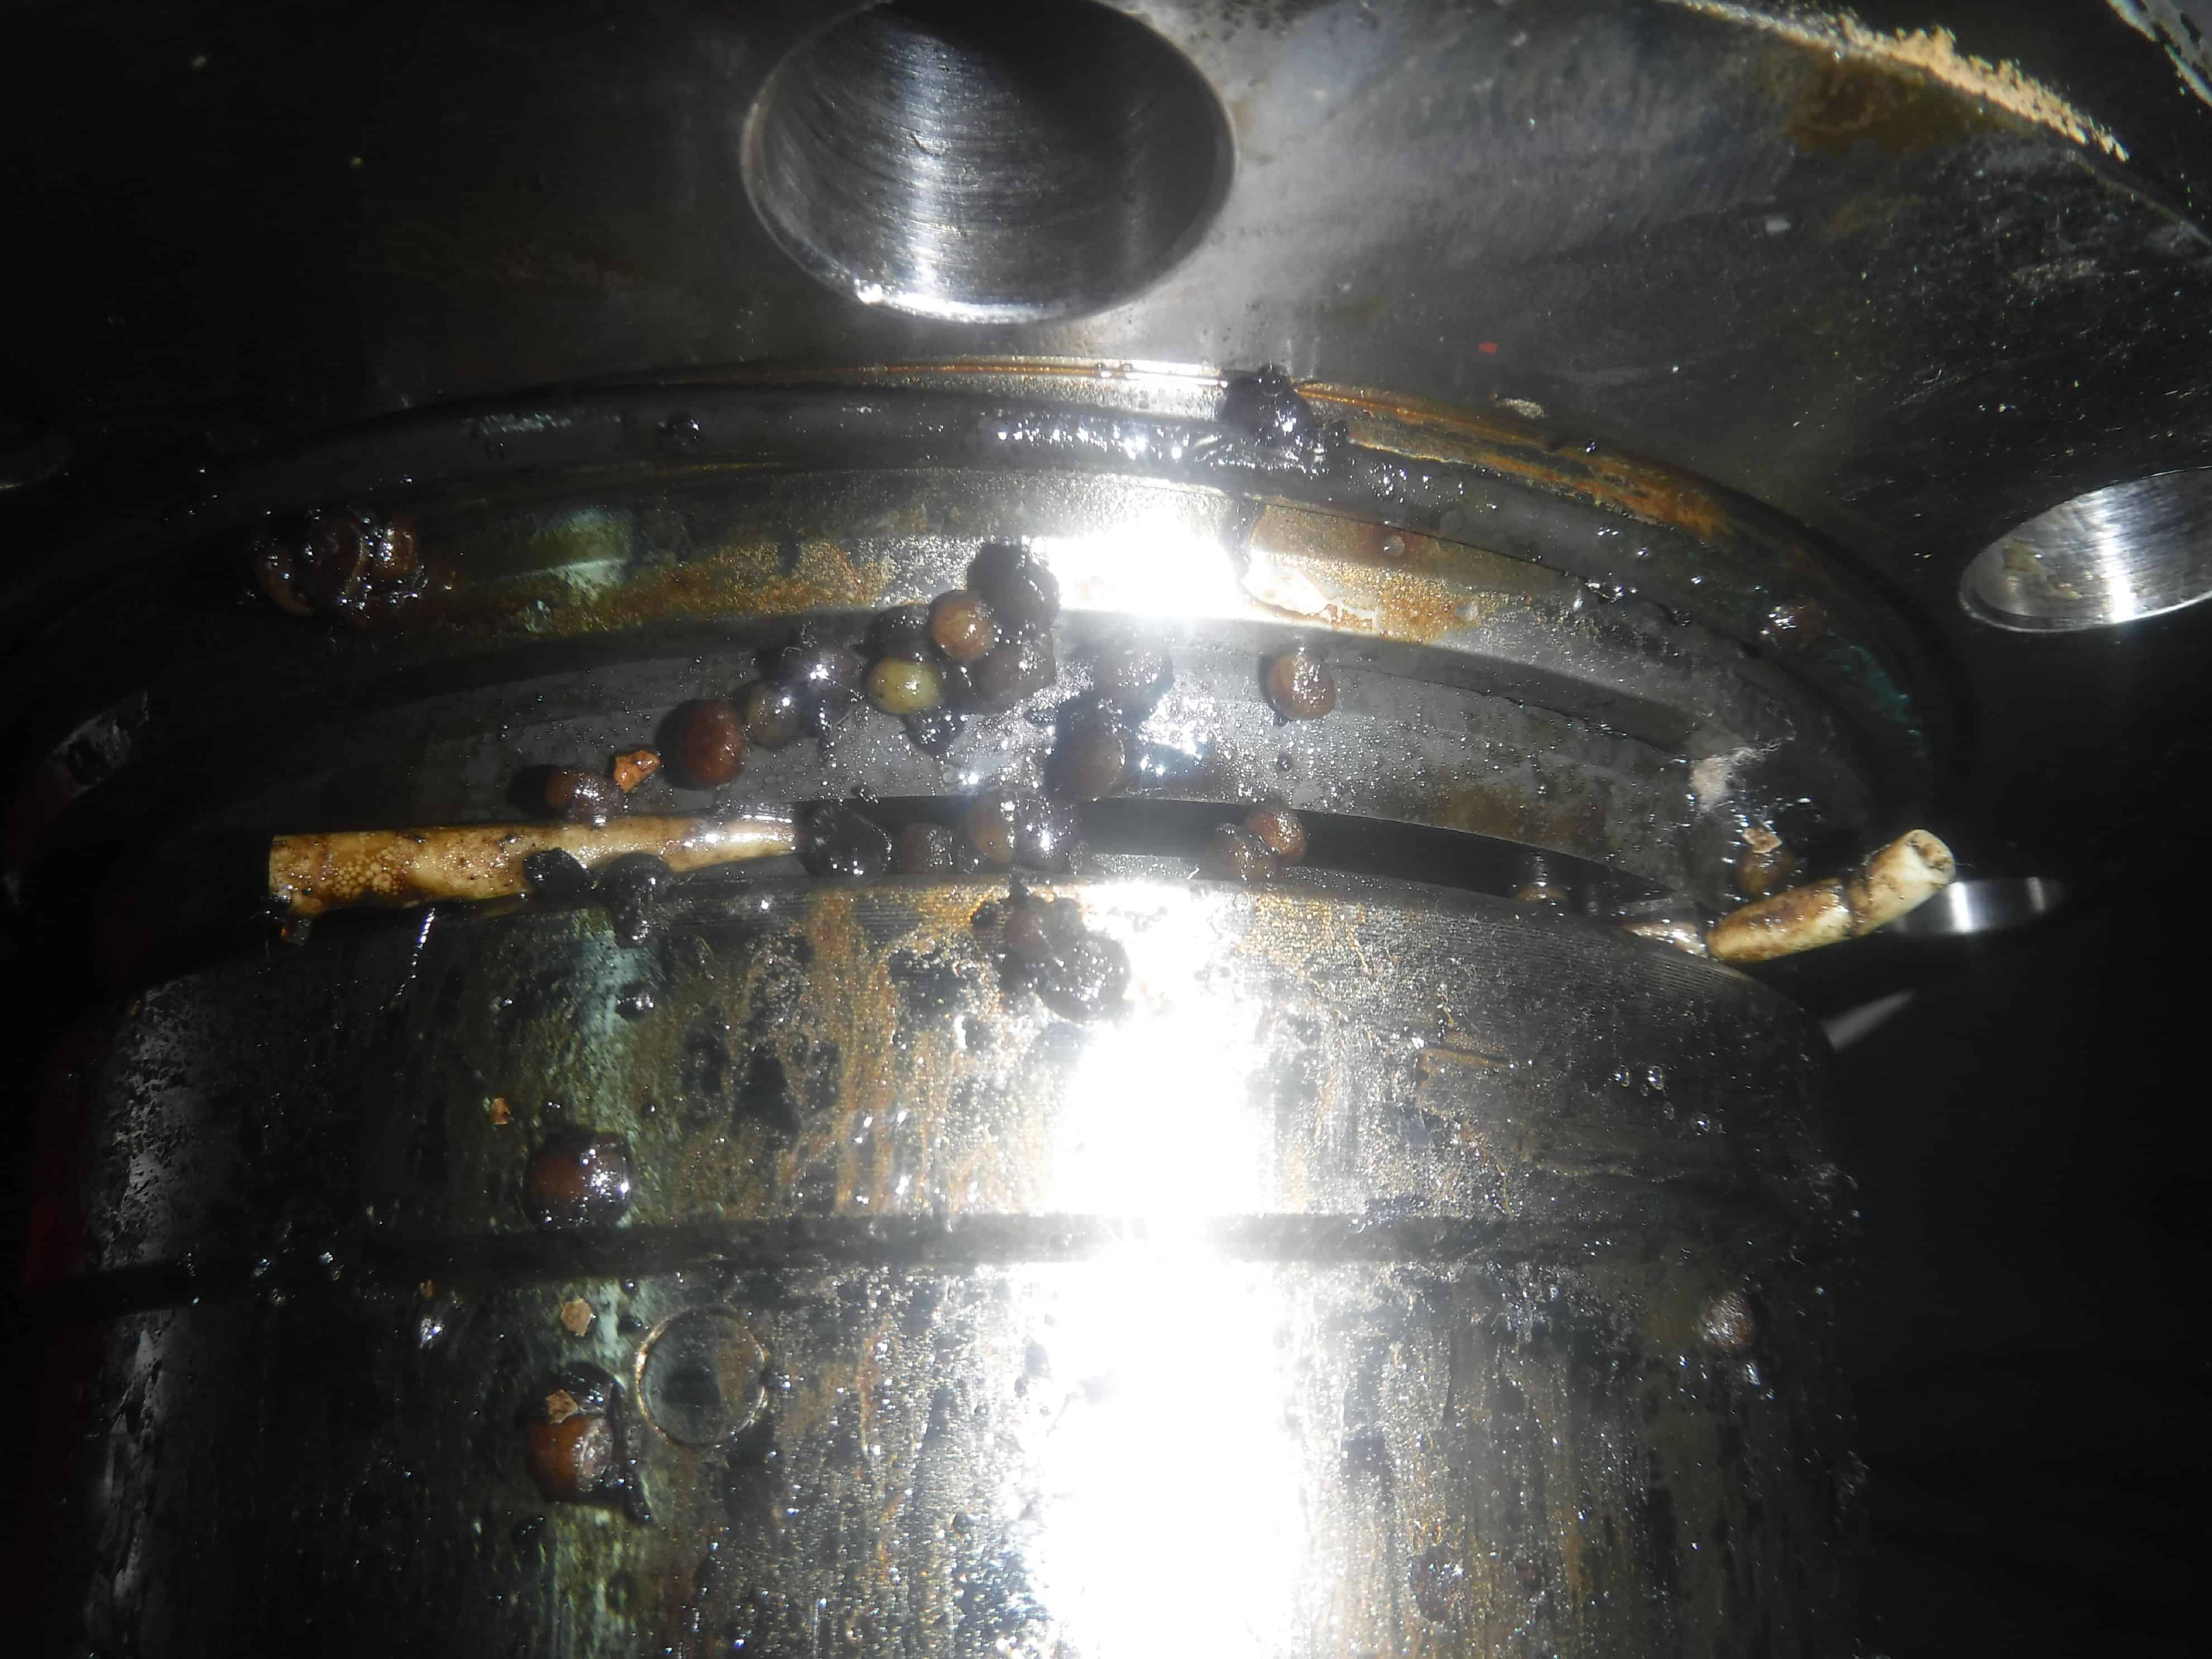 A mechanical seal support failure picture showing a seal clogged with solid material